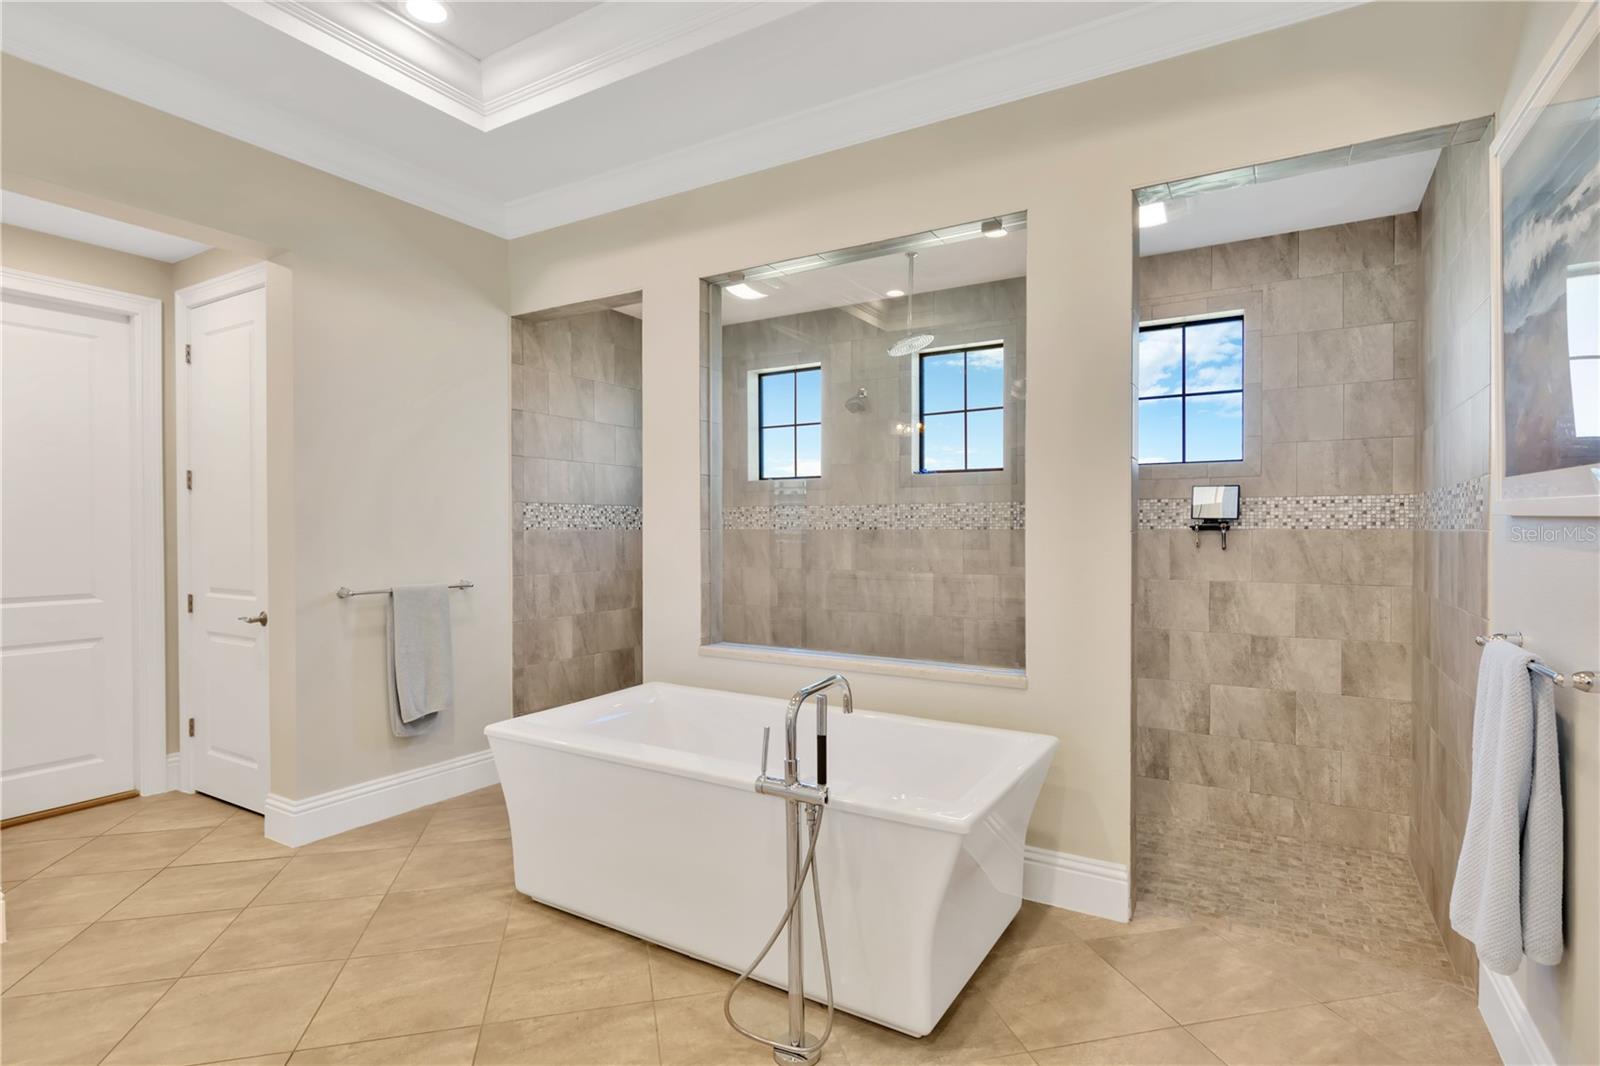 Soaking Tub and Double-sided Walkin Shower